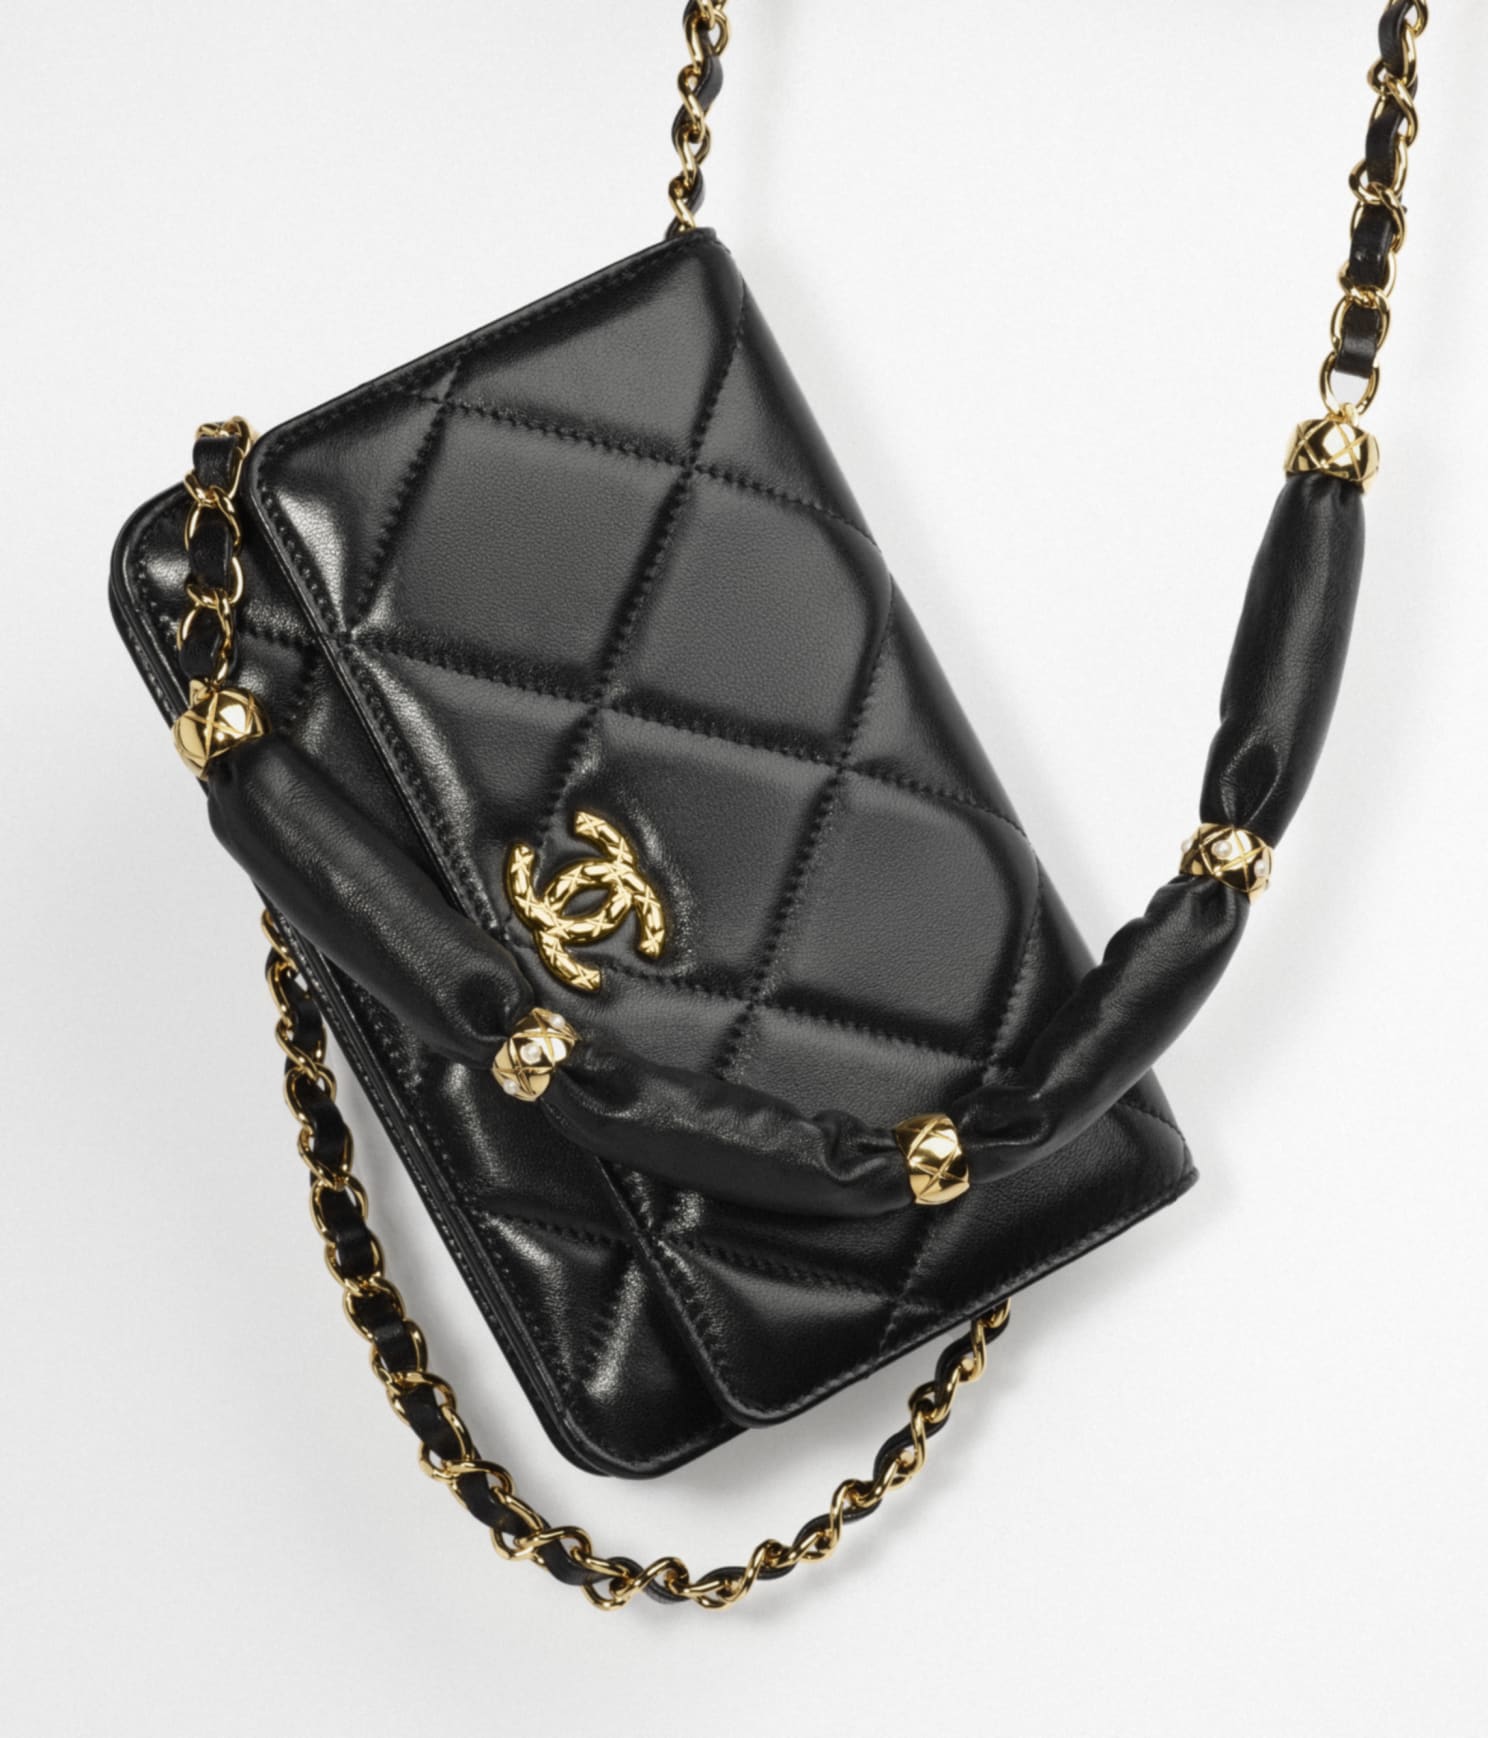 Special Edition of Chanel WOC (Wallet On Chain) in 2021 – Coco